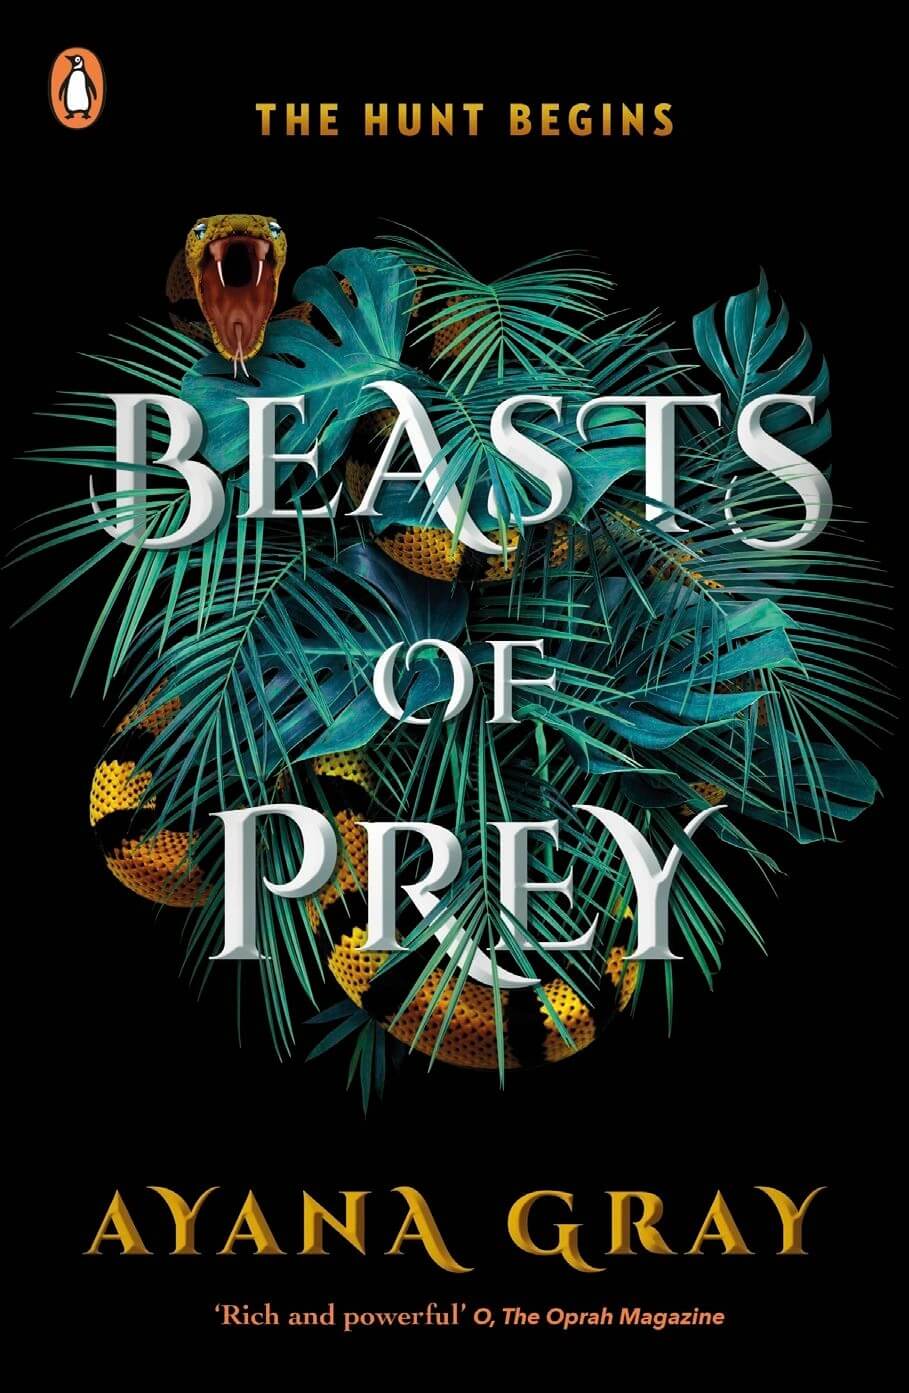 Beasts of Pray by Ayana Gray